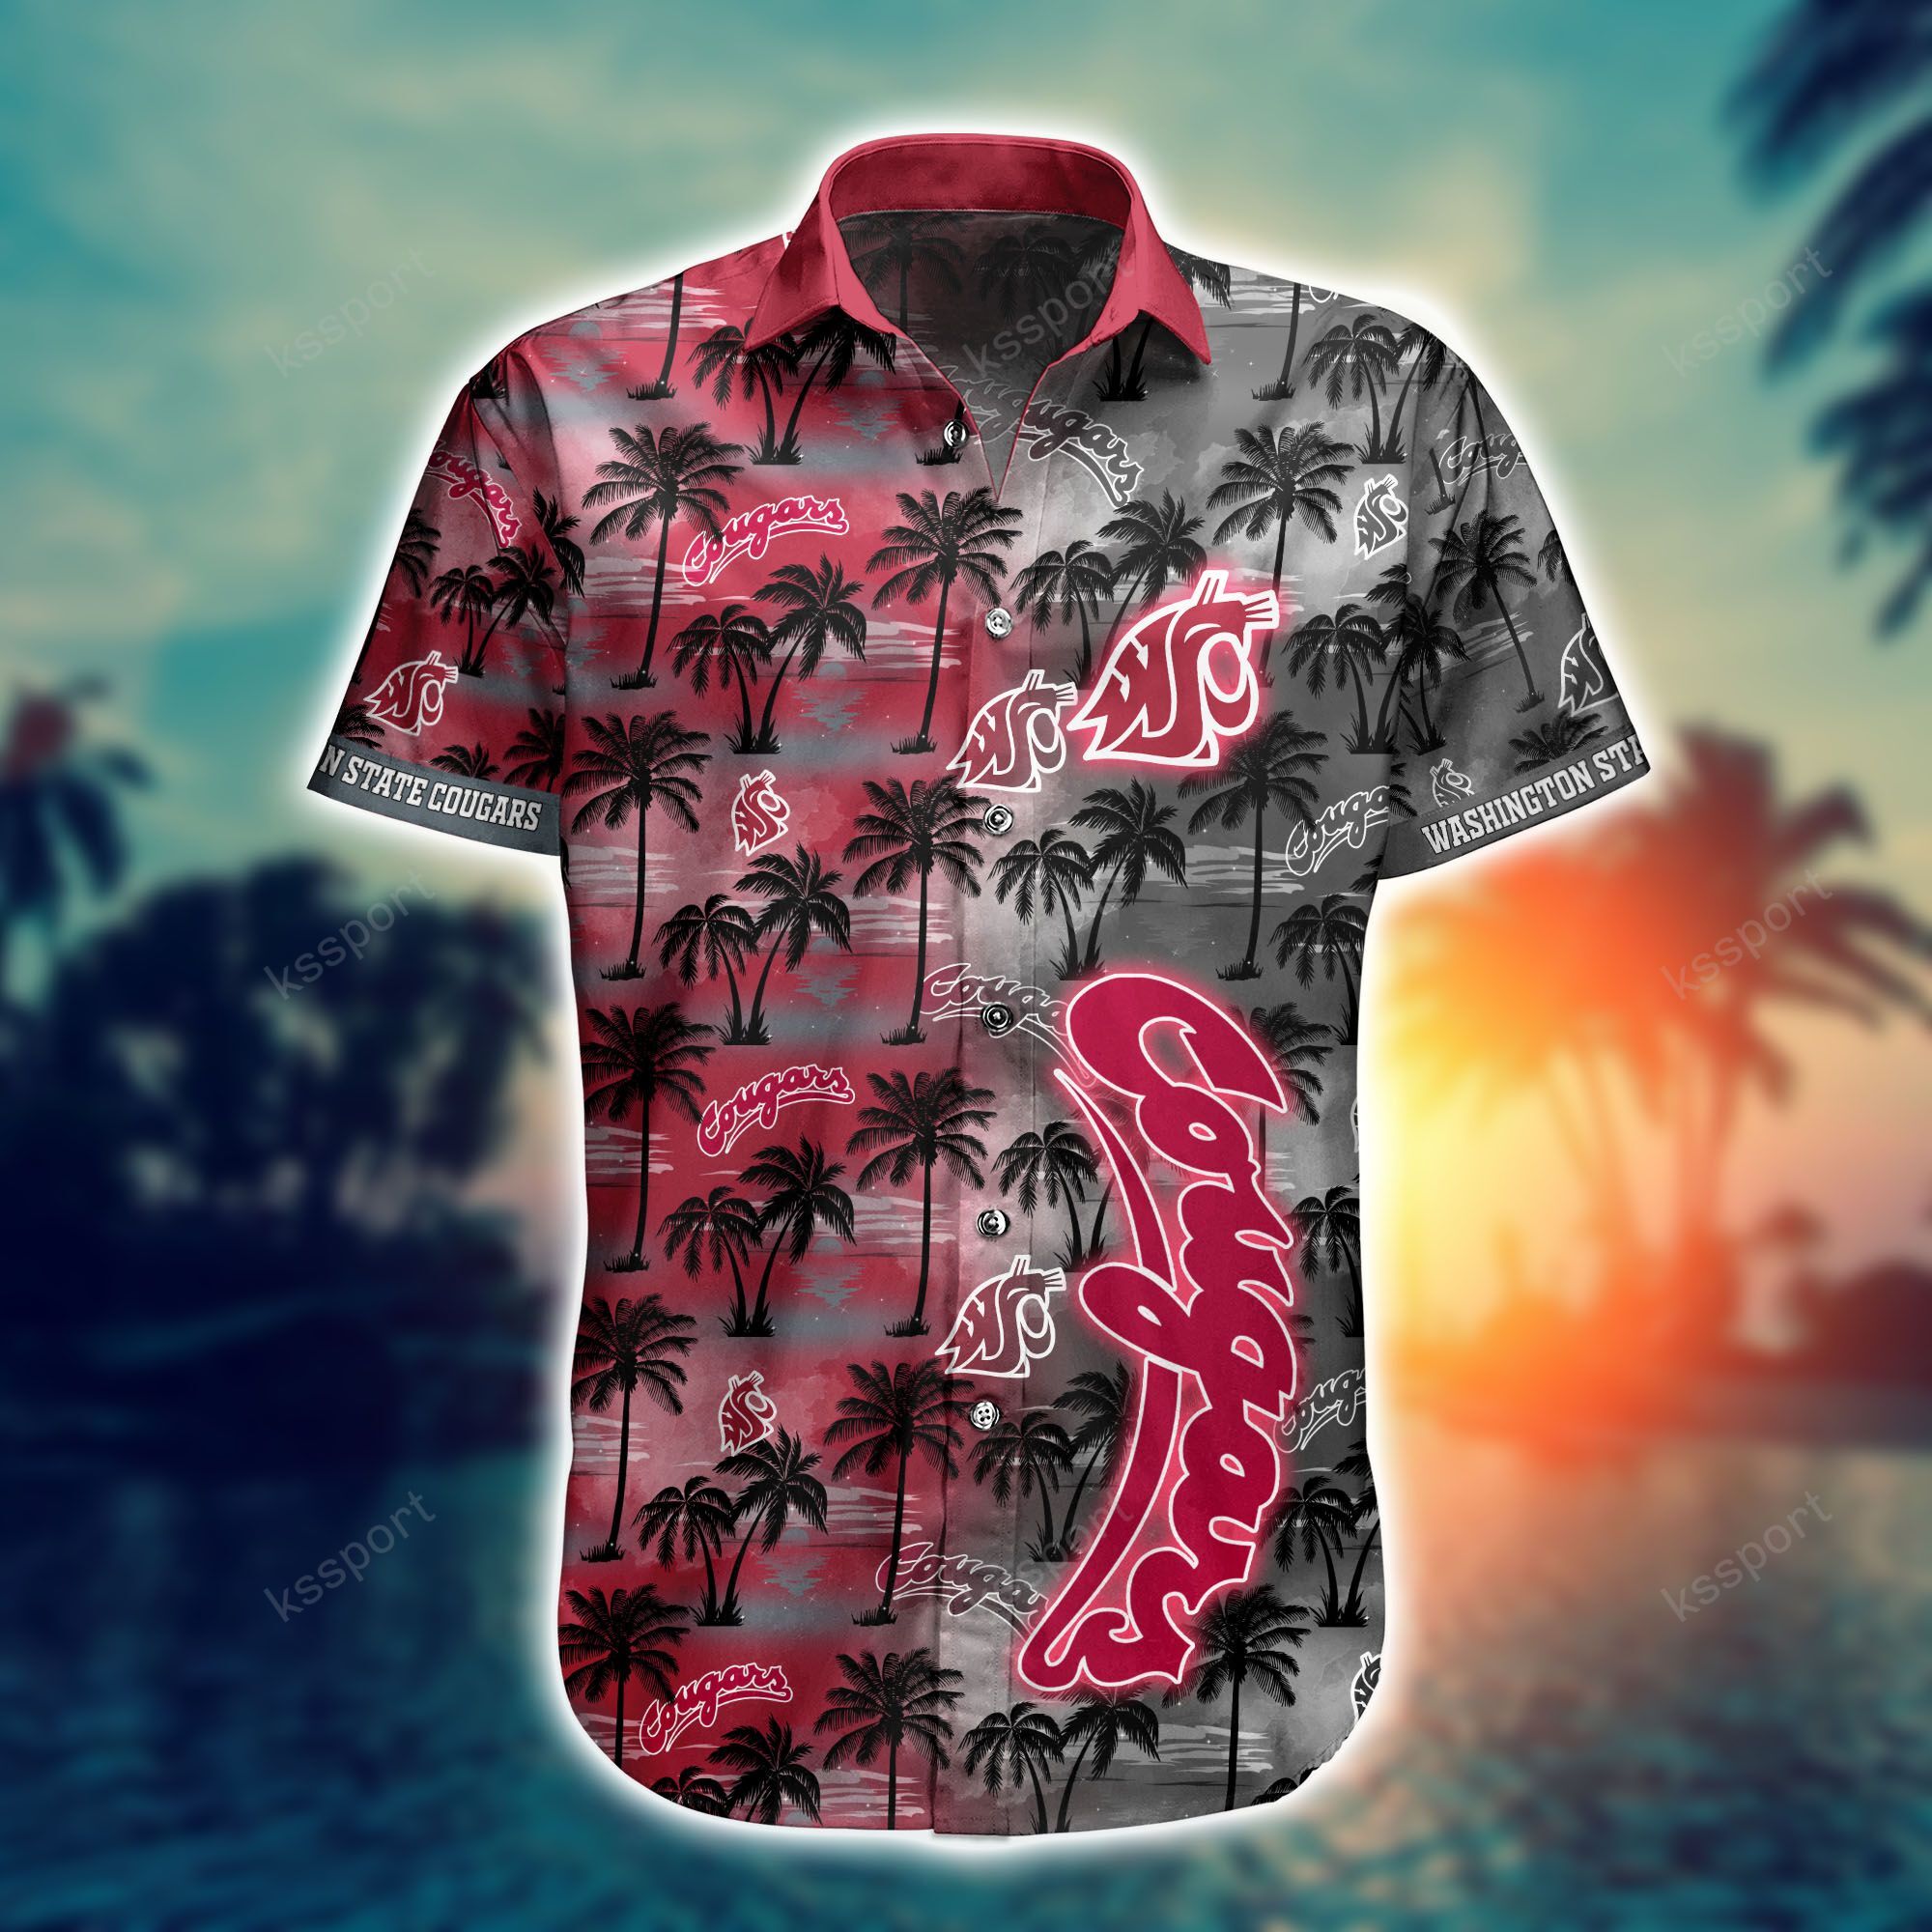 Top cool Hawaiian shirt 2022 - Make sure you get yours today before they run out! 188